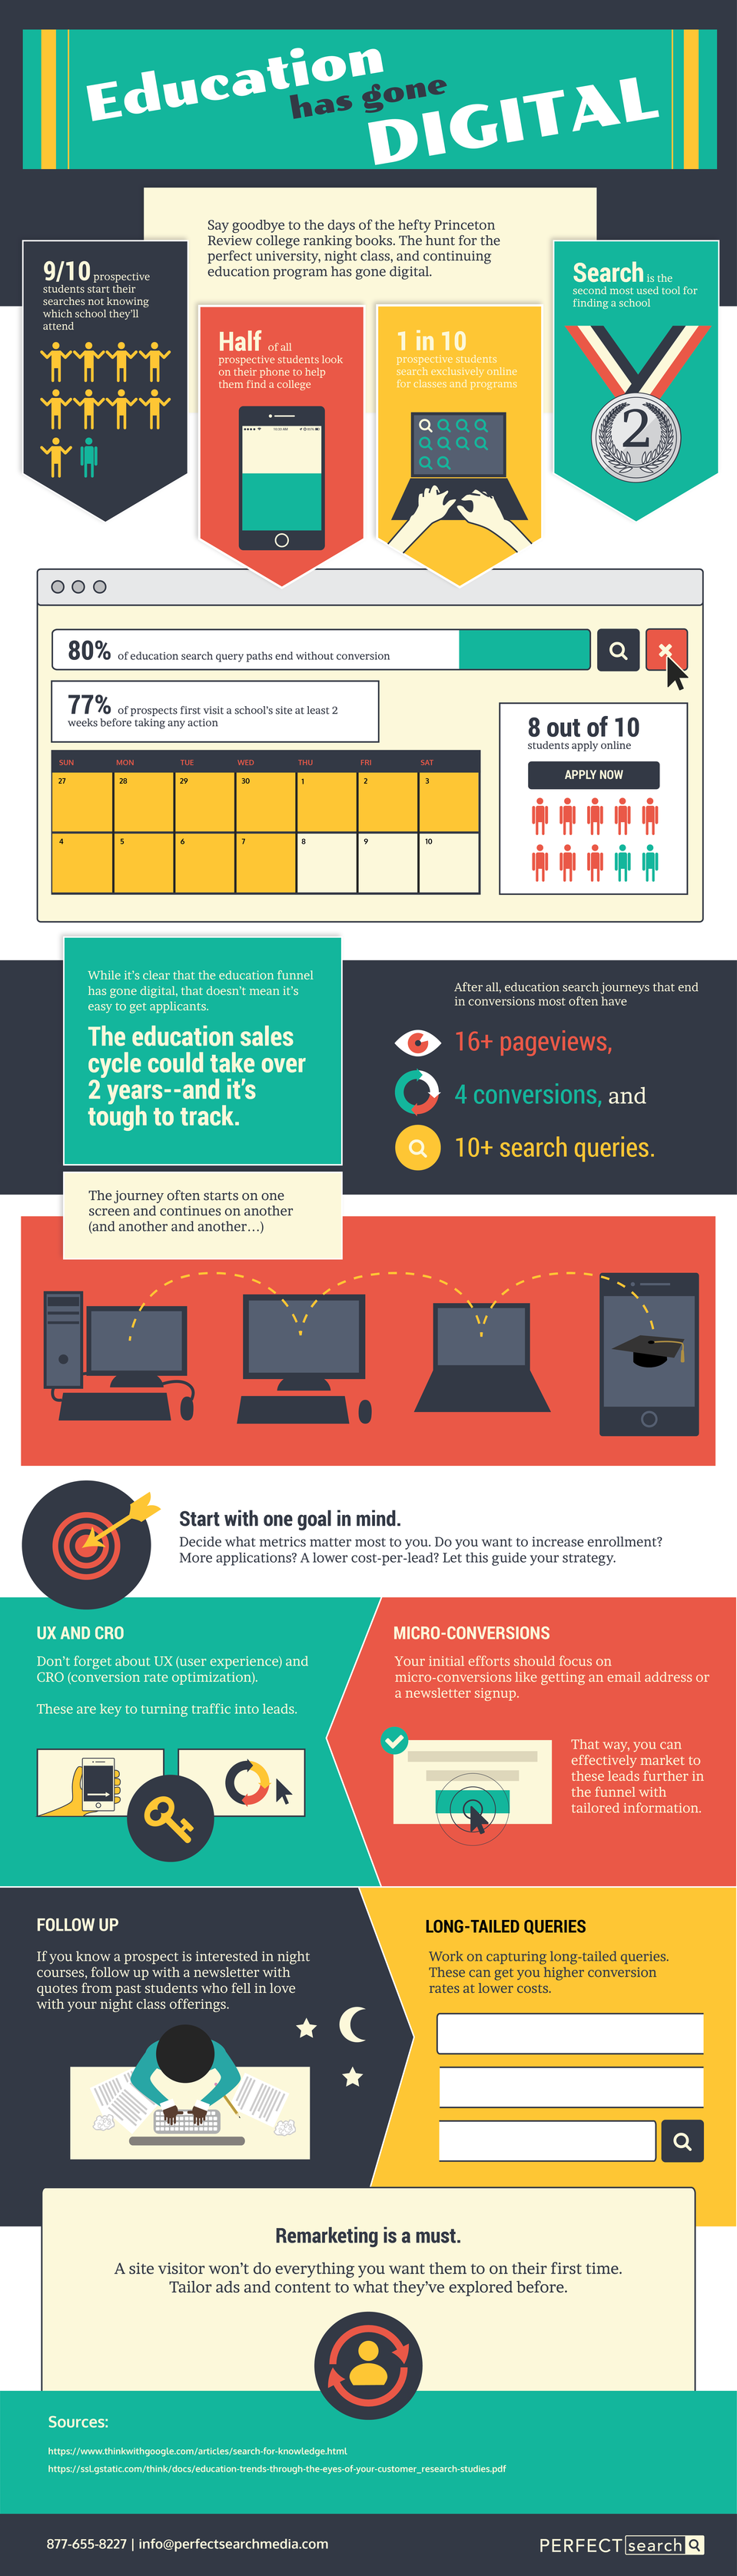 Digital Marketing for Education Infographic